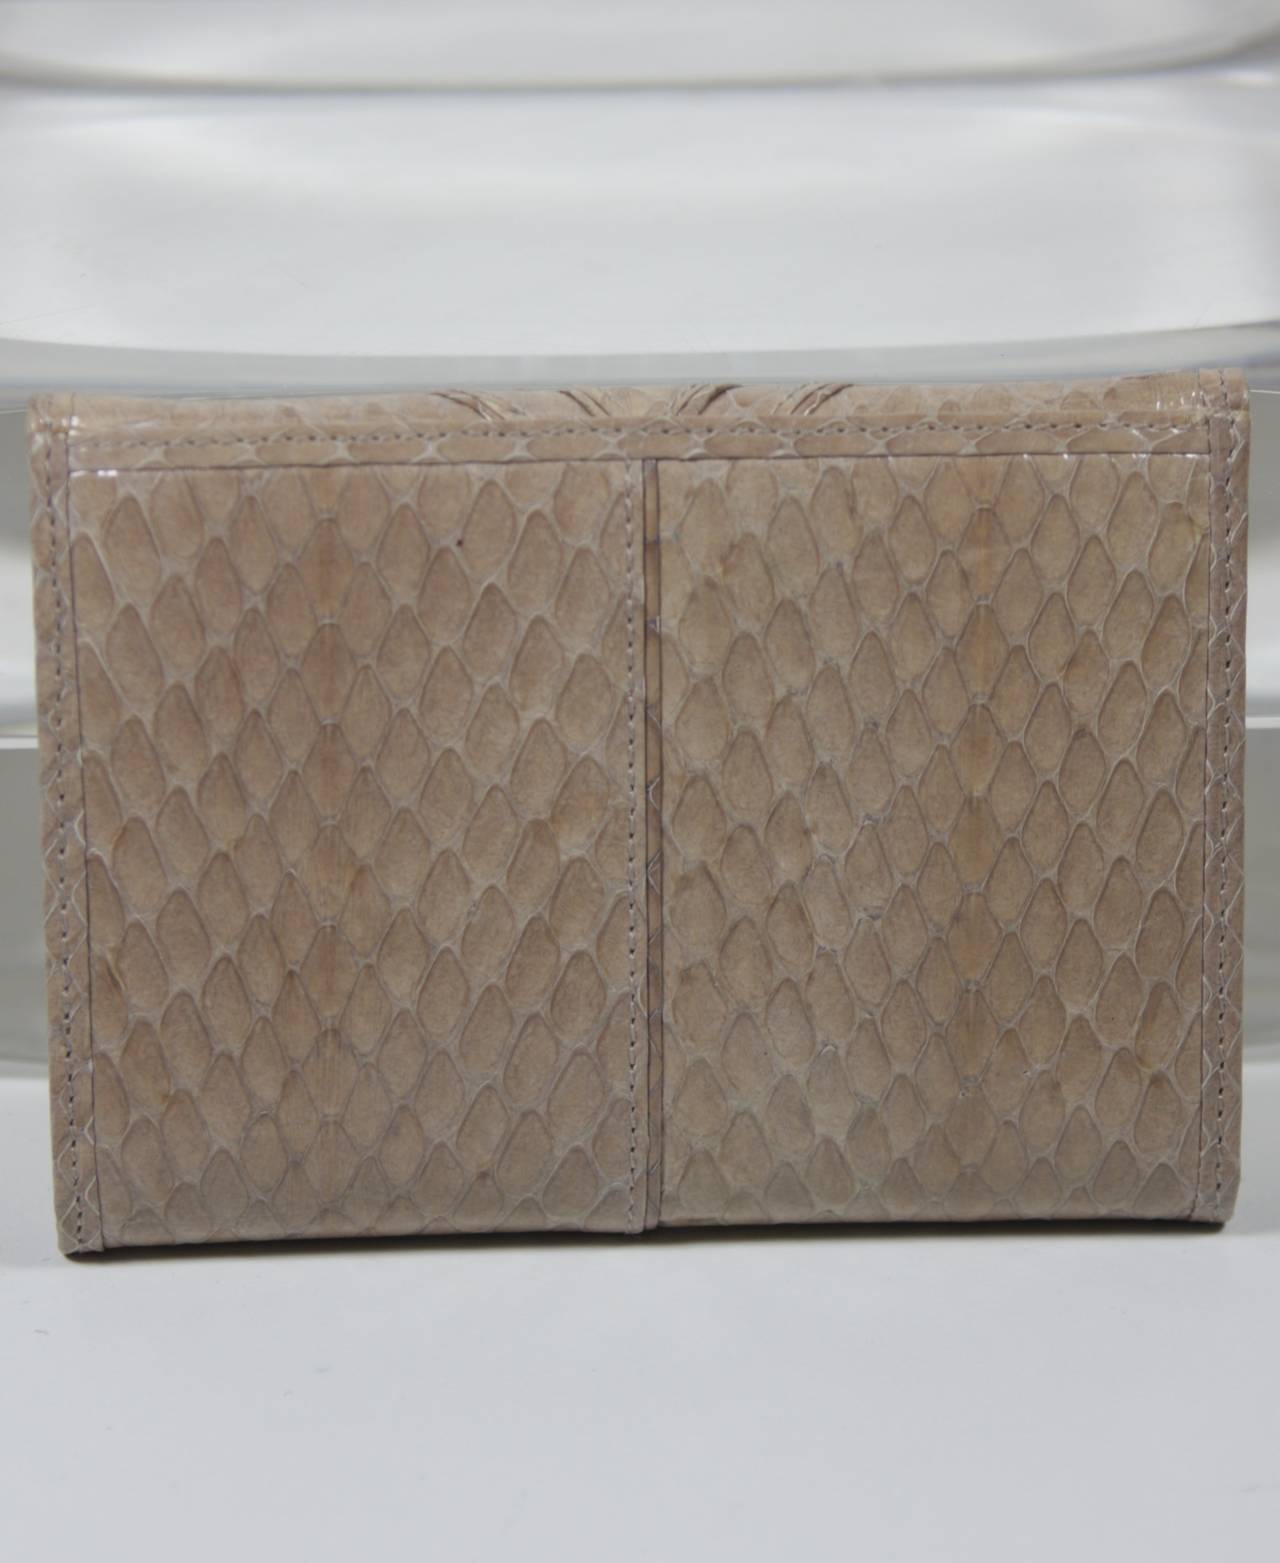 Judith Leiber Nude Snakeskin Wallet with Gold Hardware 1